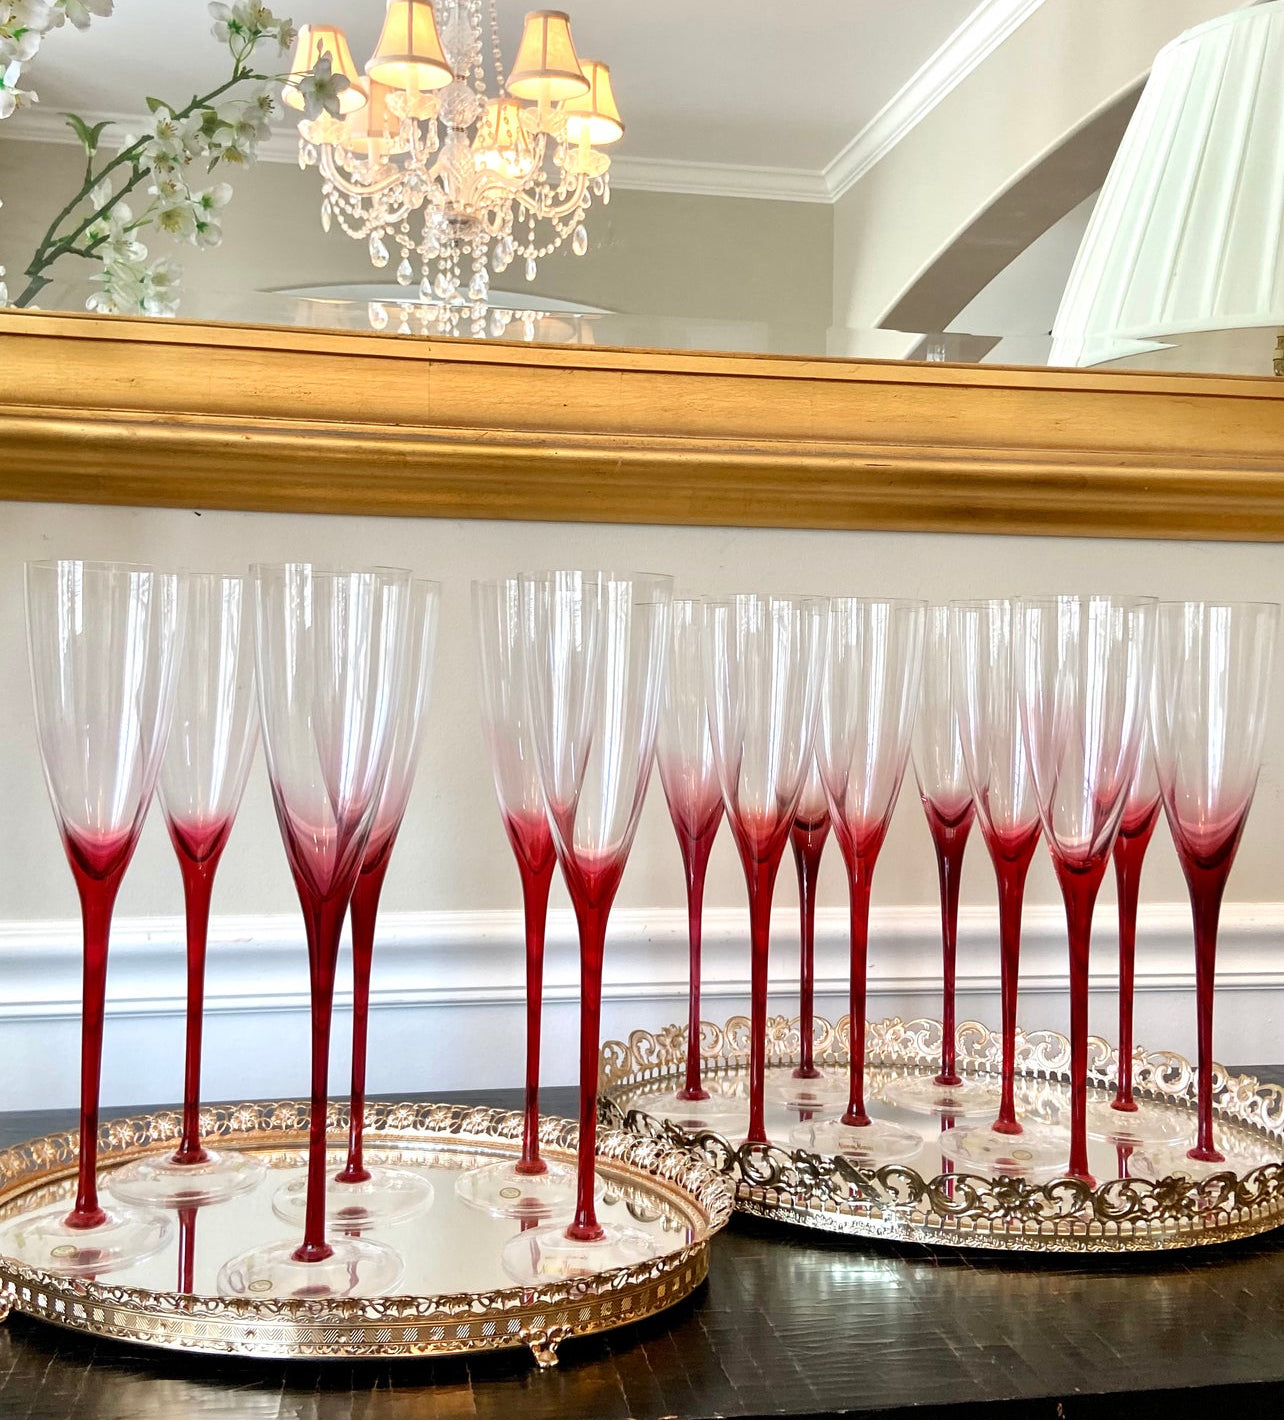 Set of 15 Retired Vintage NEIMAN MARCUS Exclusive Crystal Stemware Champagne glasses in pinky red hombre